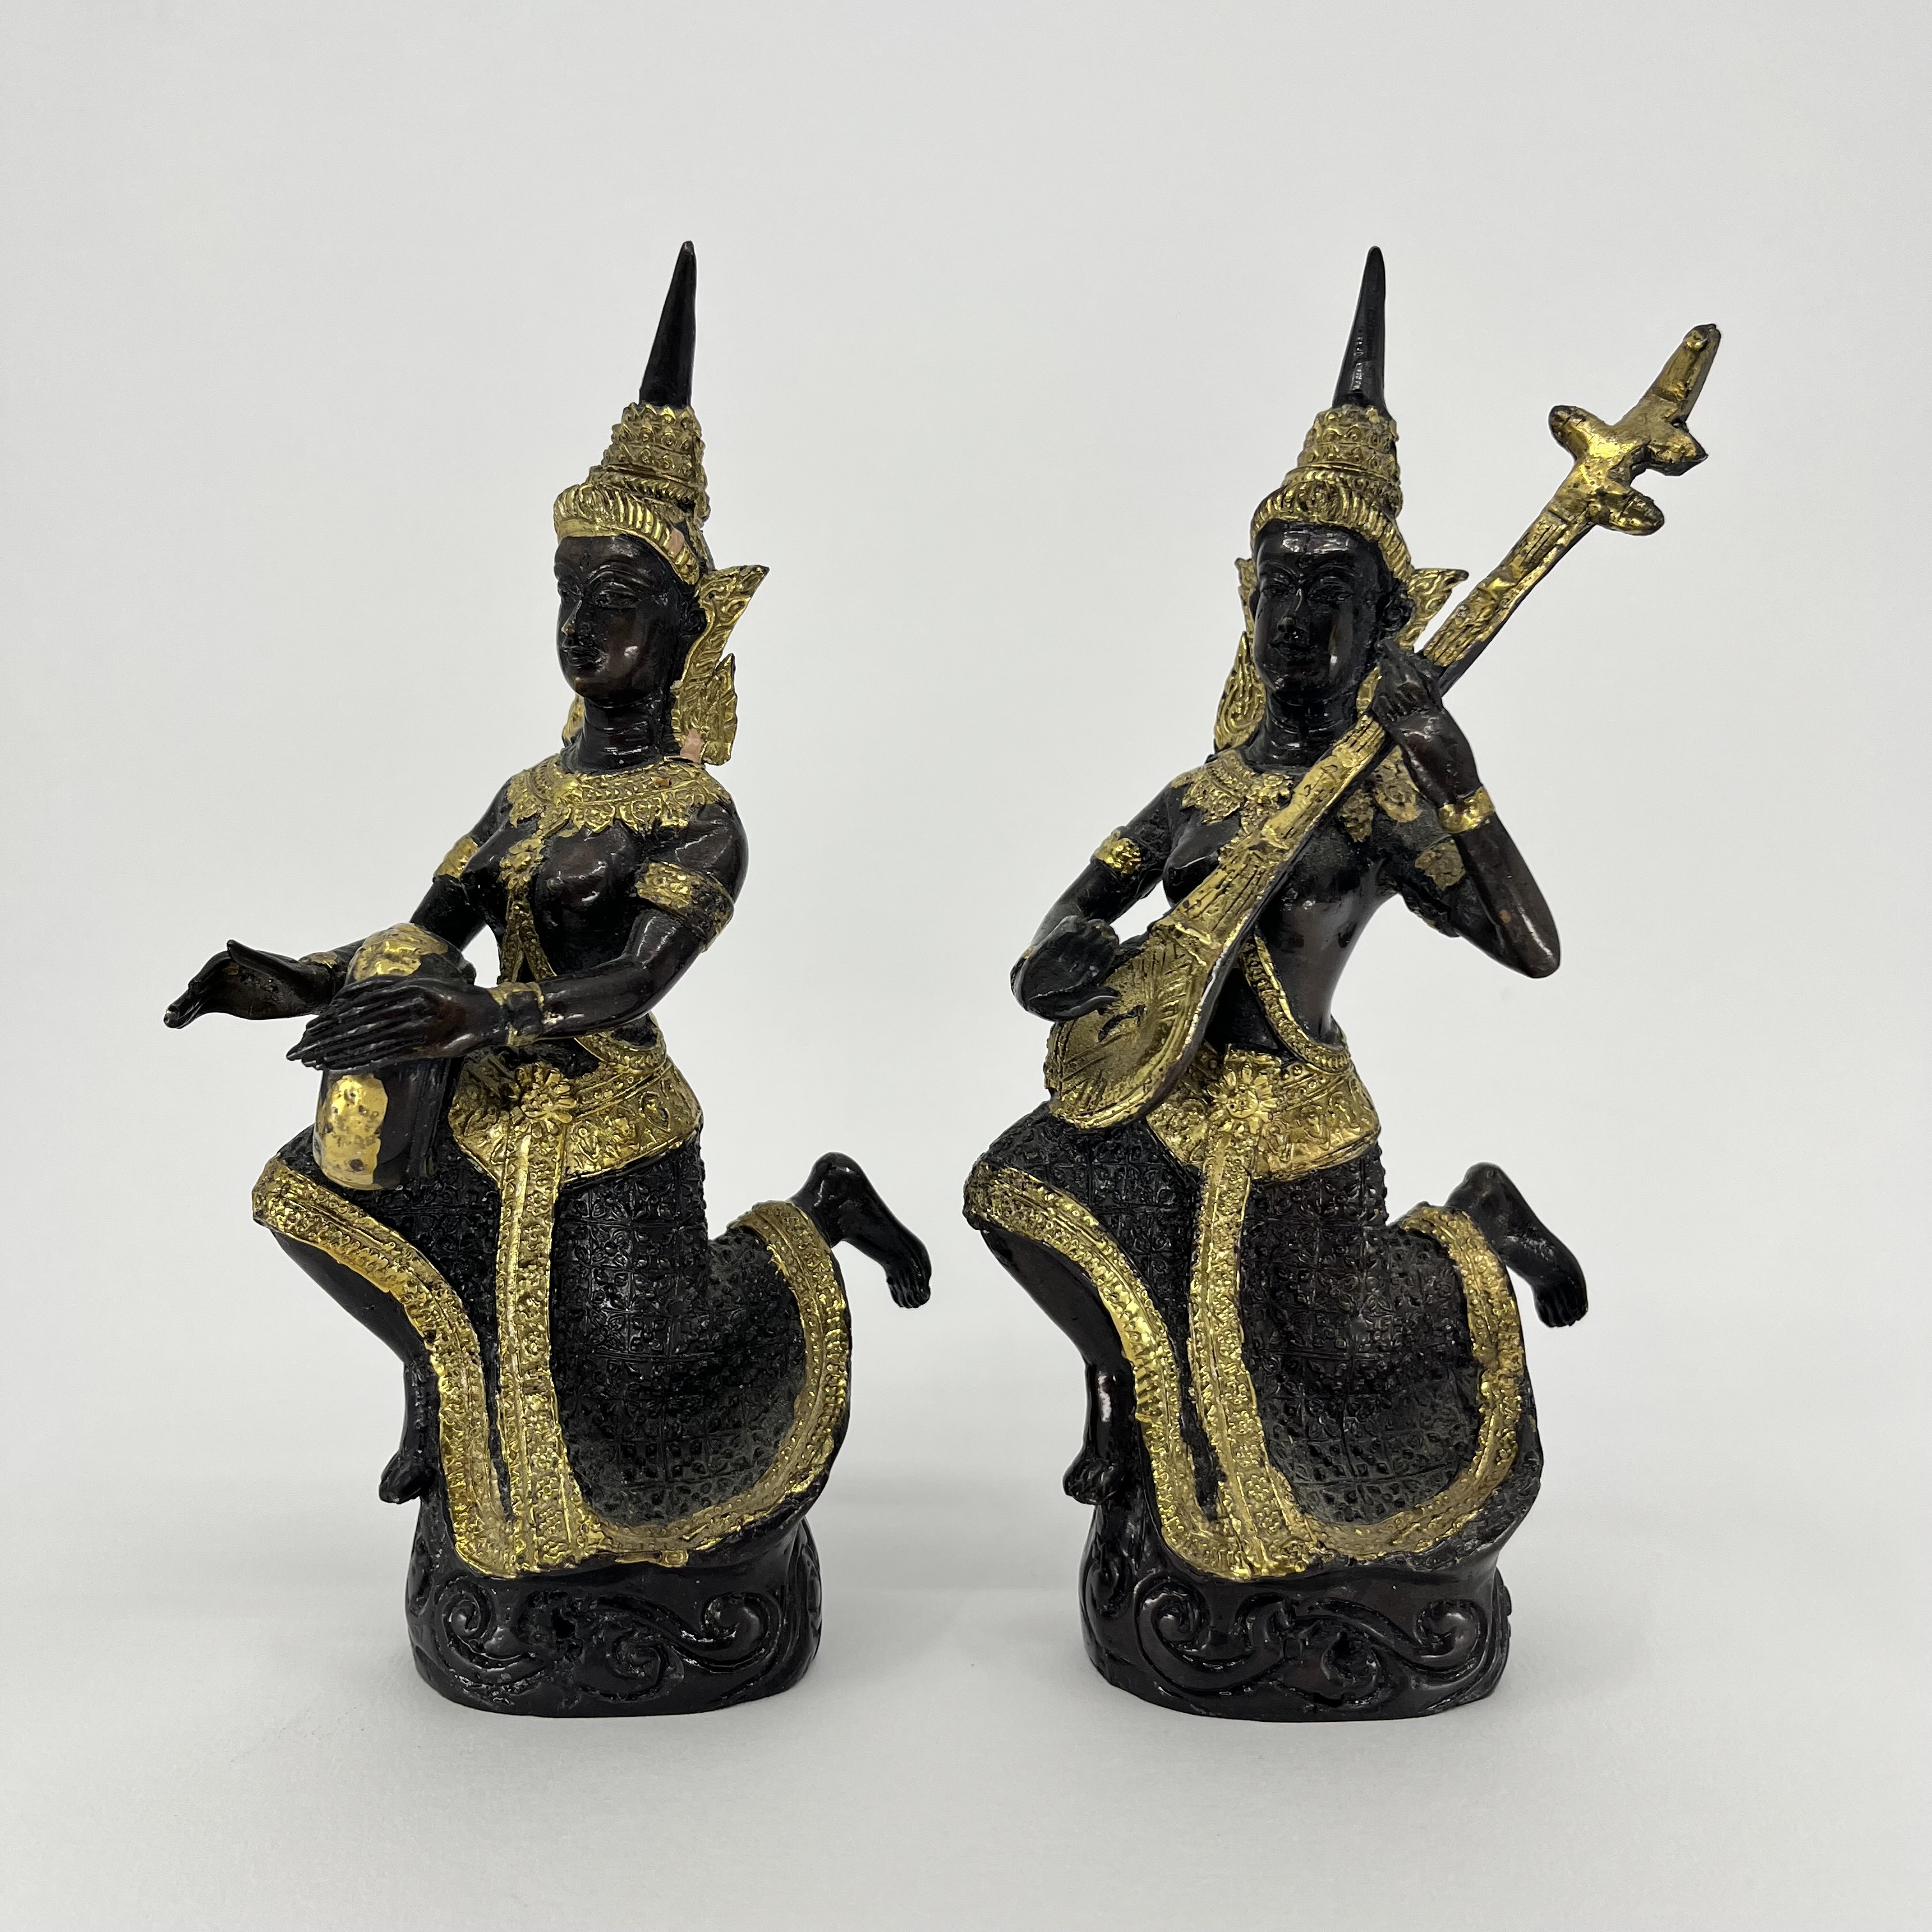 A Pair of Gilded Bronze Thai Theppanom Angel Temple Musician Figurines